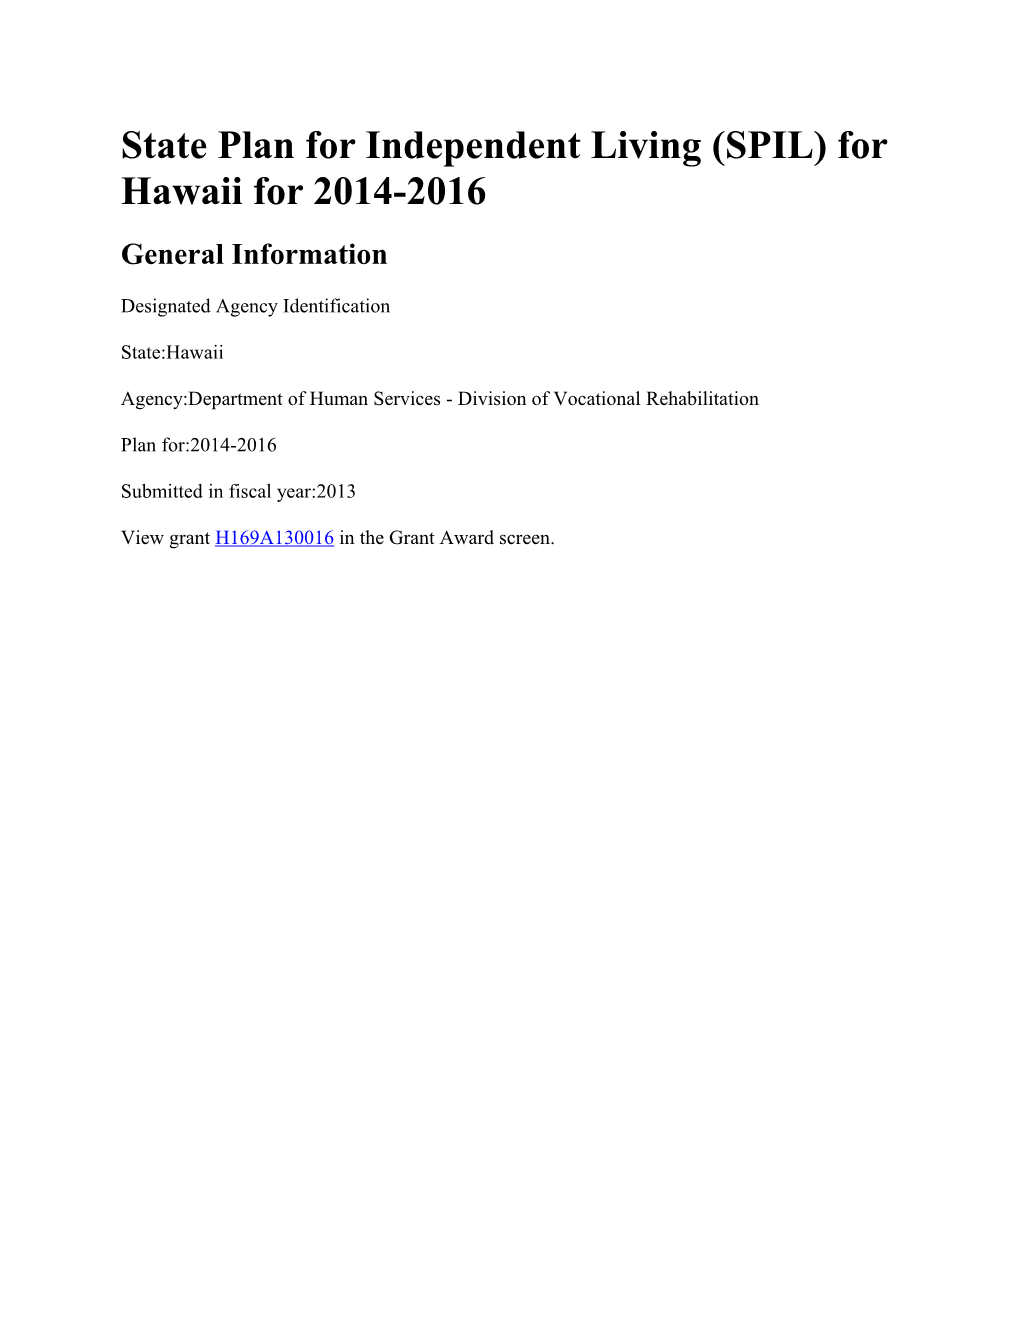 State Plan for Independent Living (SPIL) for Hawaii for 2014-2016